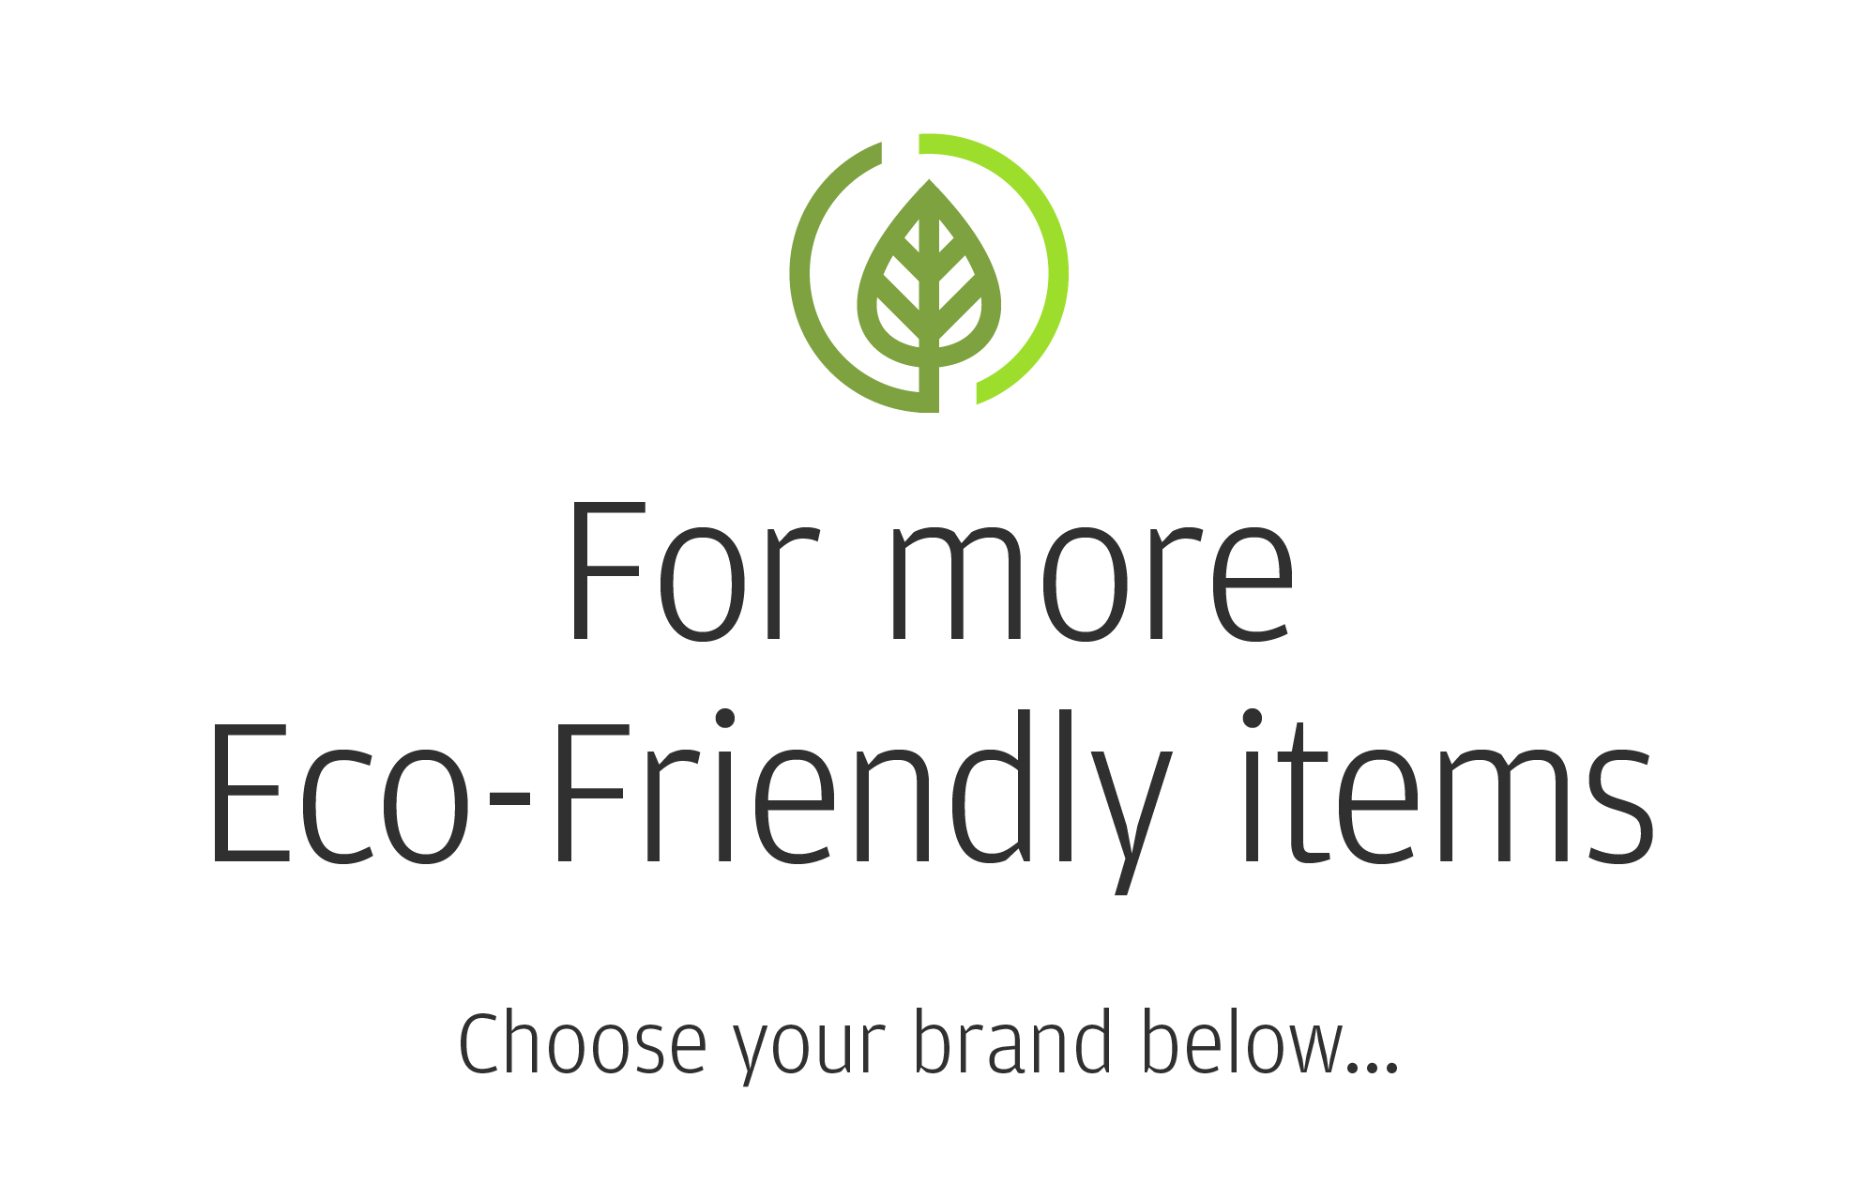 Shop all Eco-friendly items.